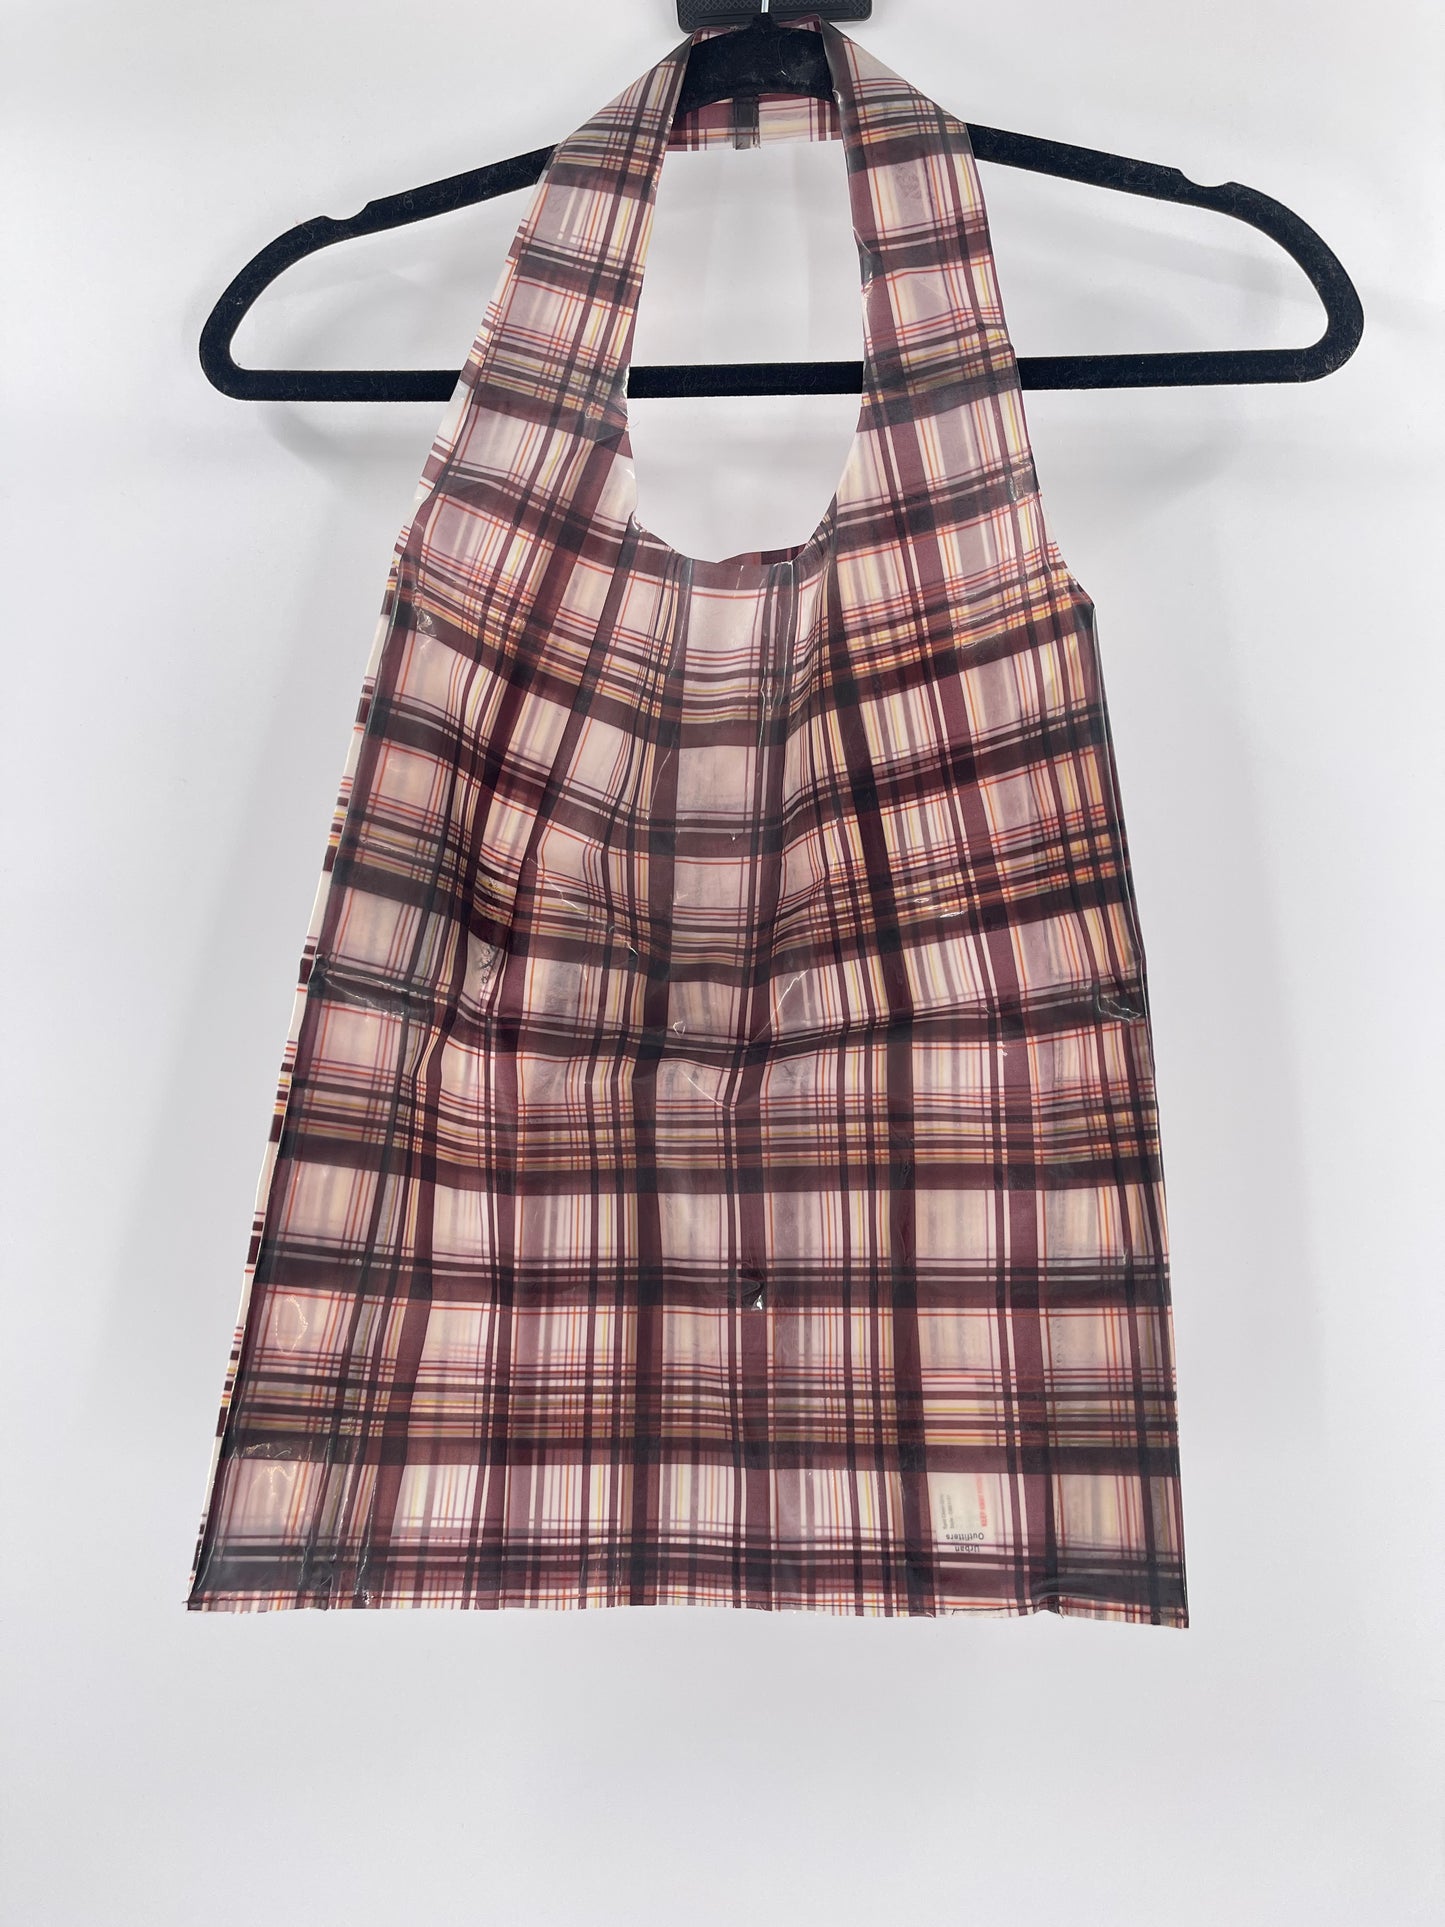 Urban Outfitters plastic plaid tote bag